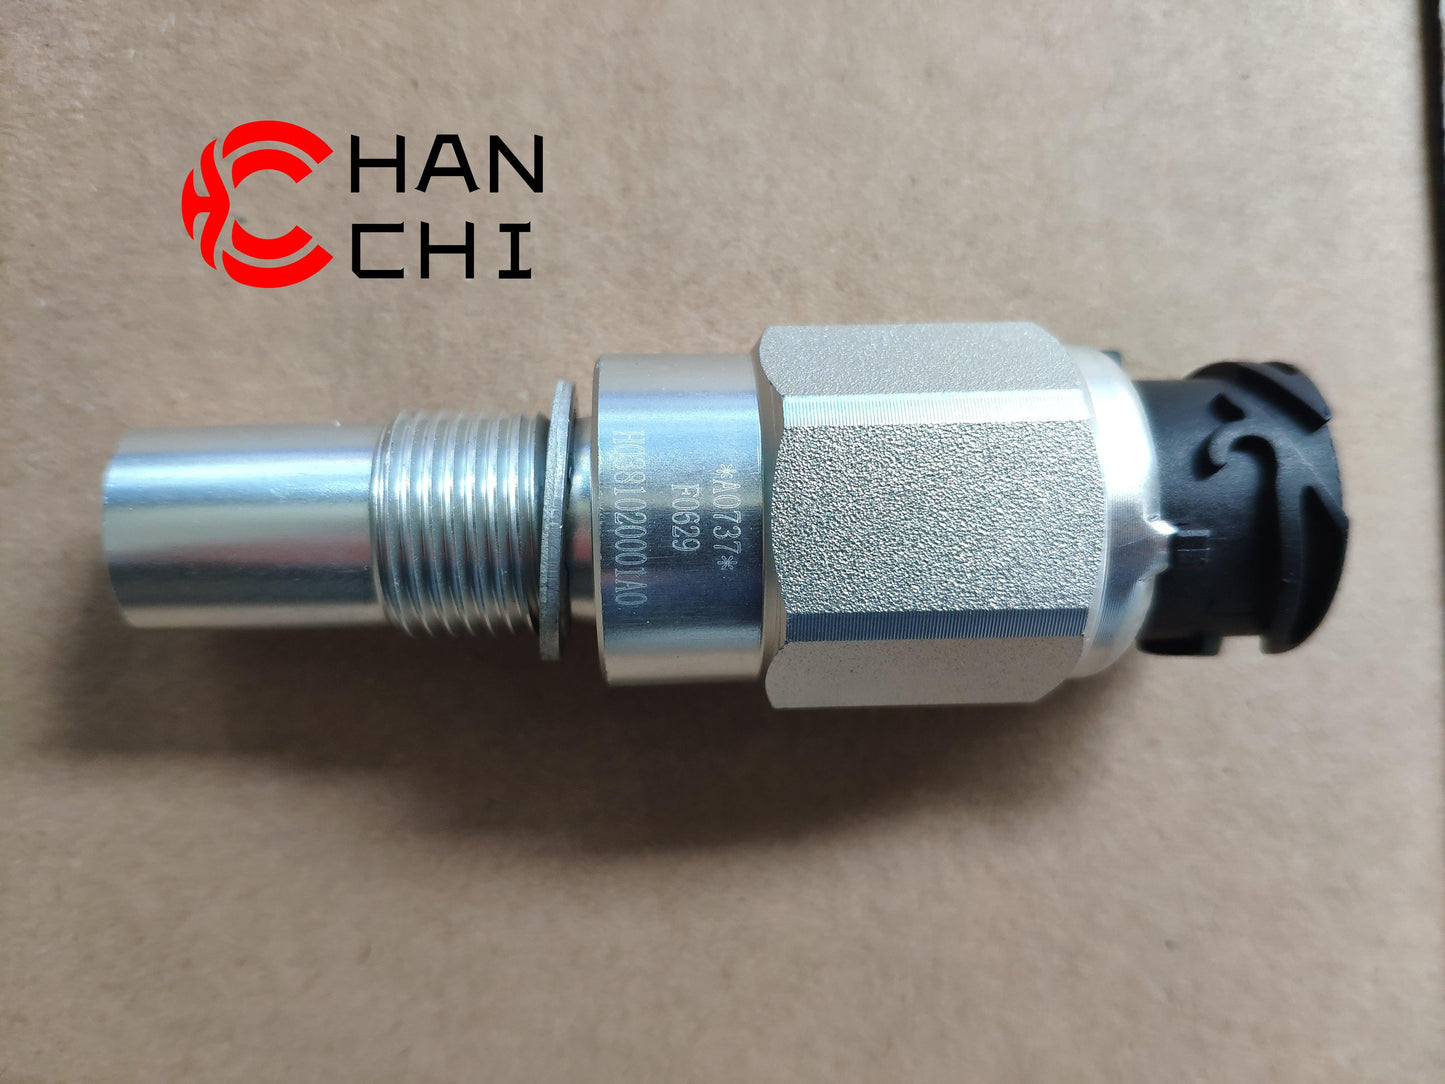 【Description】---☀Welcome to HANCHI☀---✔Good Quality✔Generally Applicability✔Competitive PriceEnjoy your shopping time↖（^ω^）↗【Features】Brand-New with High Quality for the Aftermarket.Totally mathced your need.**Stable Quality**High Precision**Easy Installation**【Specification】OEM：H0381020001A0Material：metalColor：black silverOrigin：Made in ChinaWeight：100g【Packing List】1* Speed Sensor 【More Service】 We can provide OEM service We can Be your one-step solution for Auto Parts We can provide technical